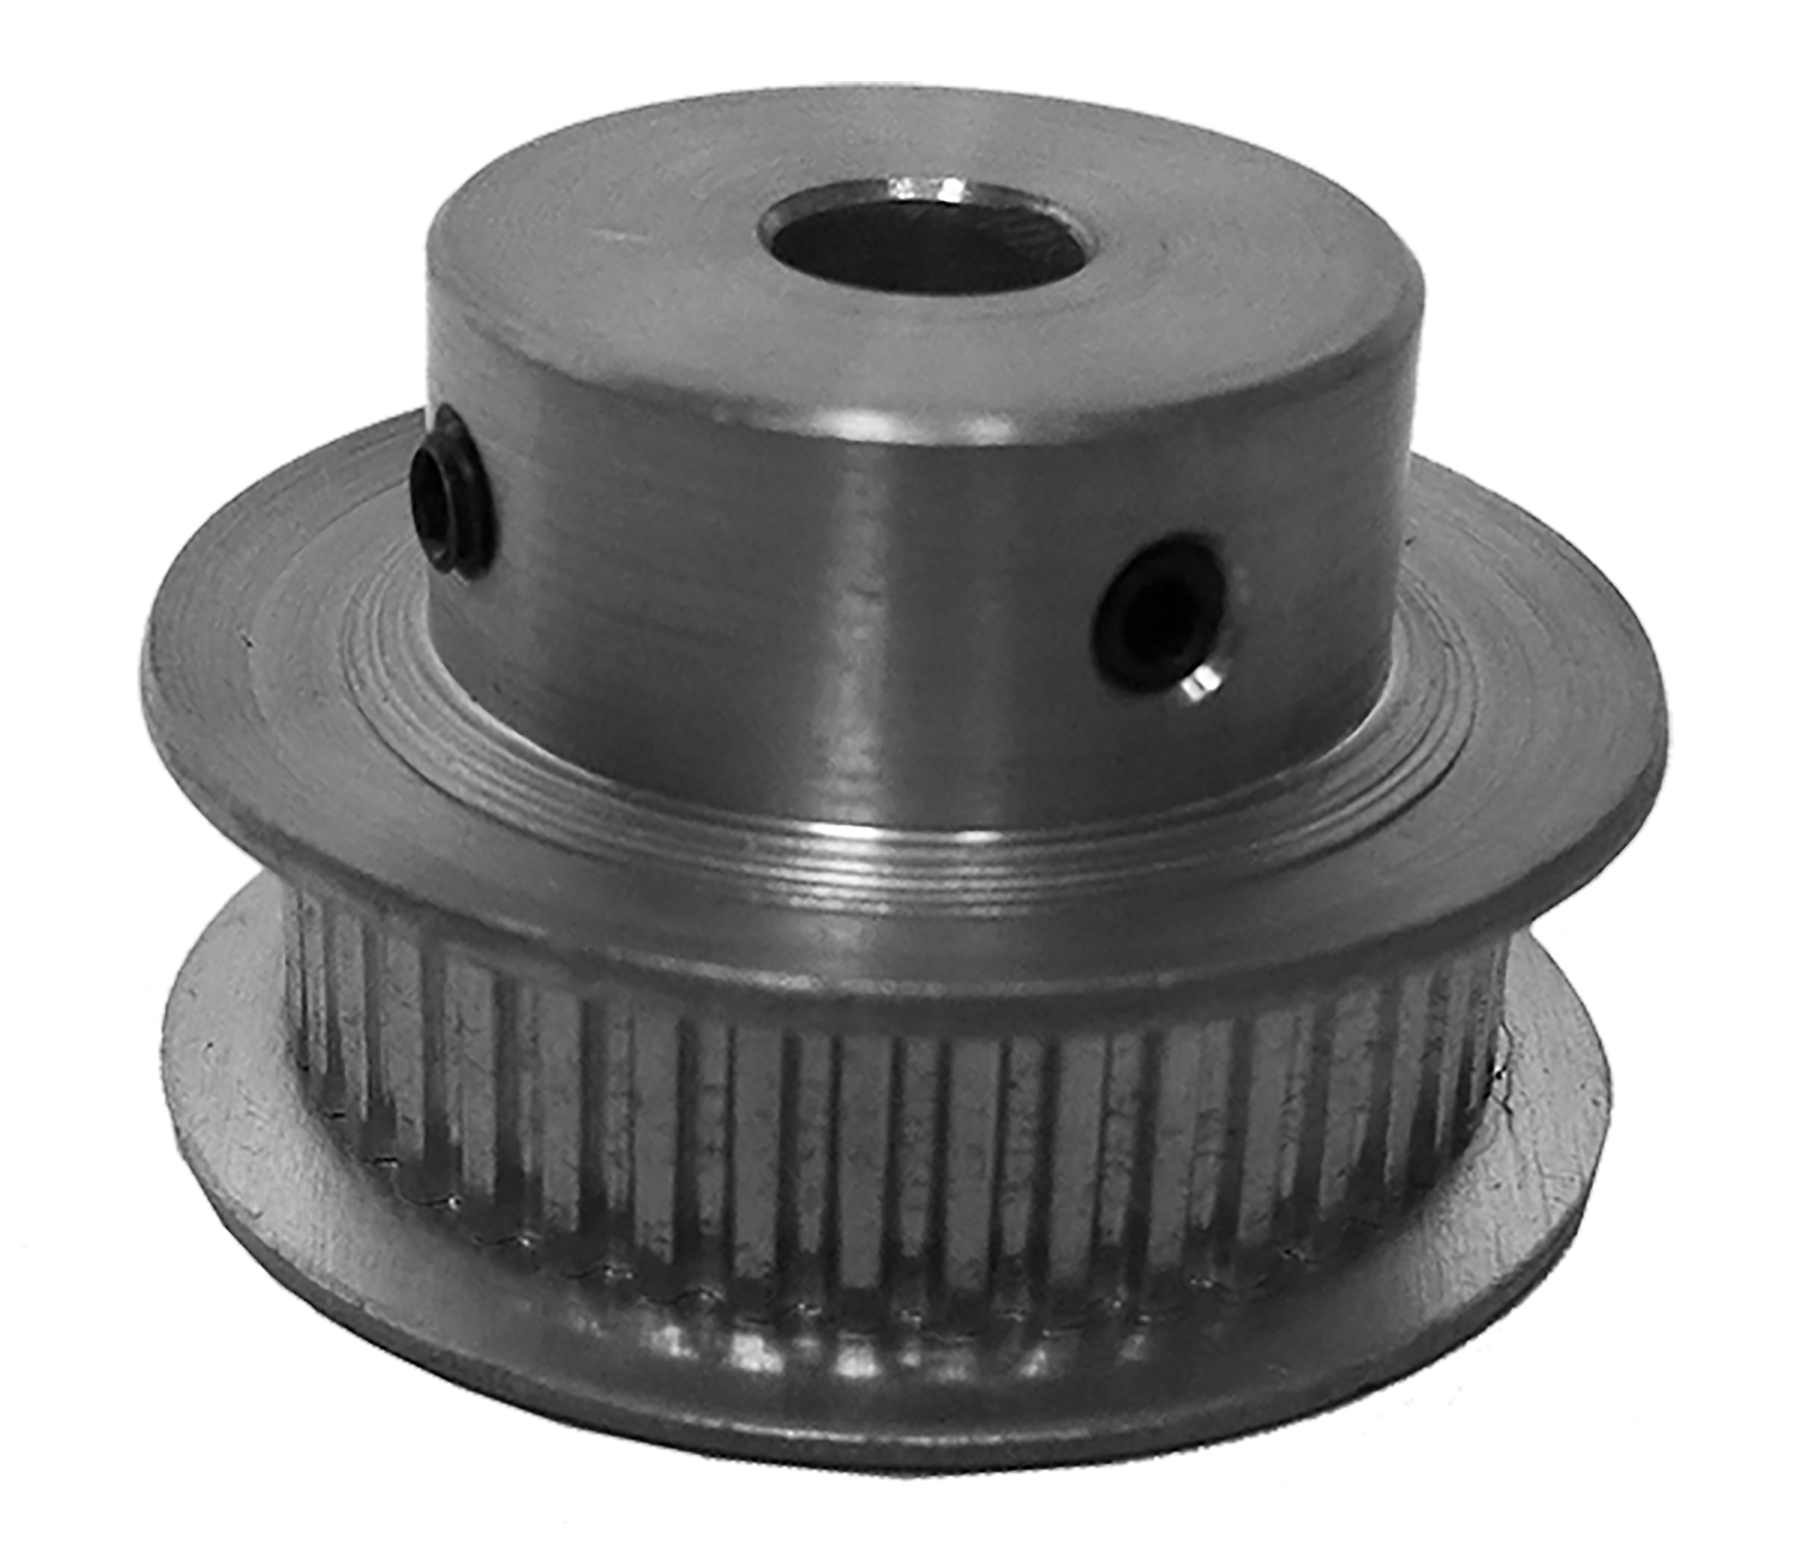 44MP025-6FA3 - Aluminum Imperial Pitch Pulleys